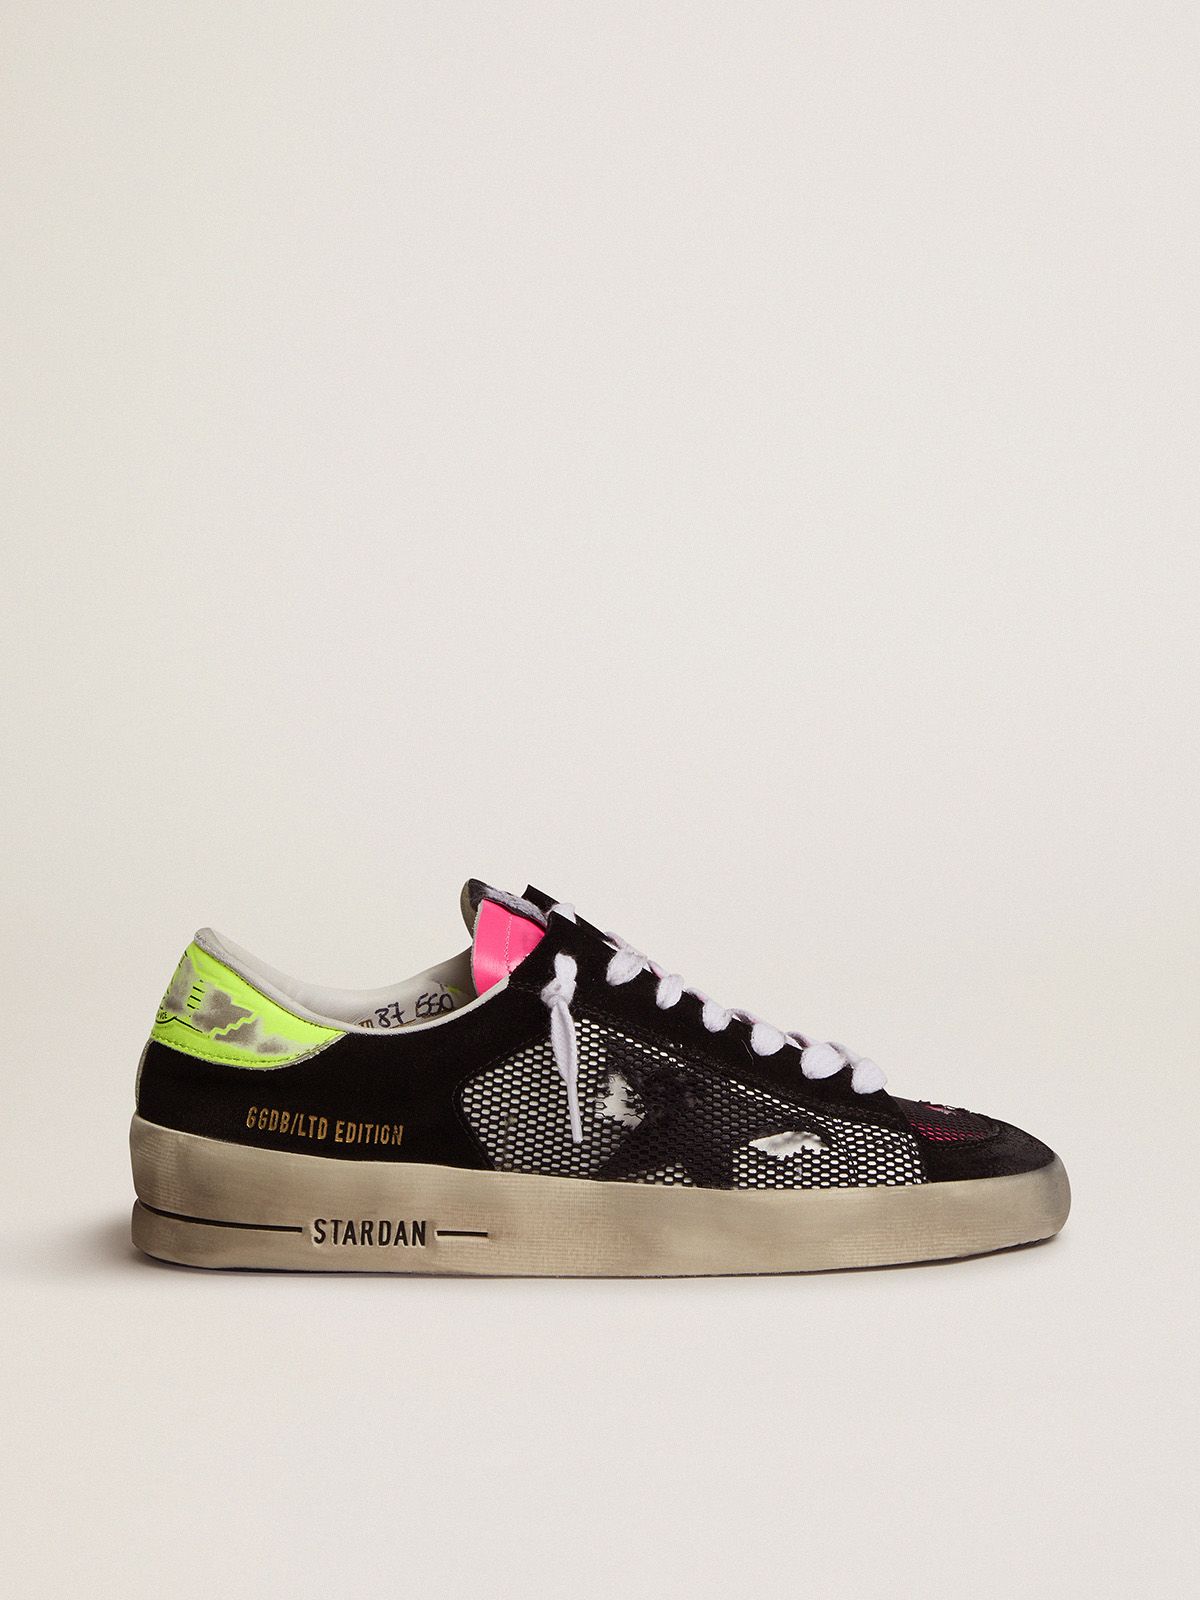 golden goose Stardan Edition sneakers and fuchsia in yellow Limited Women’s